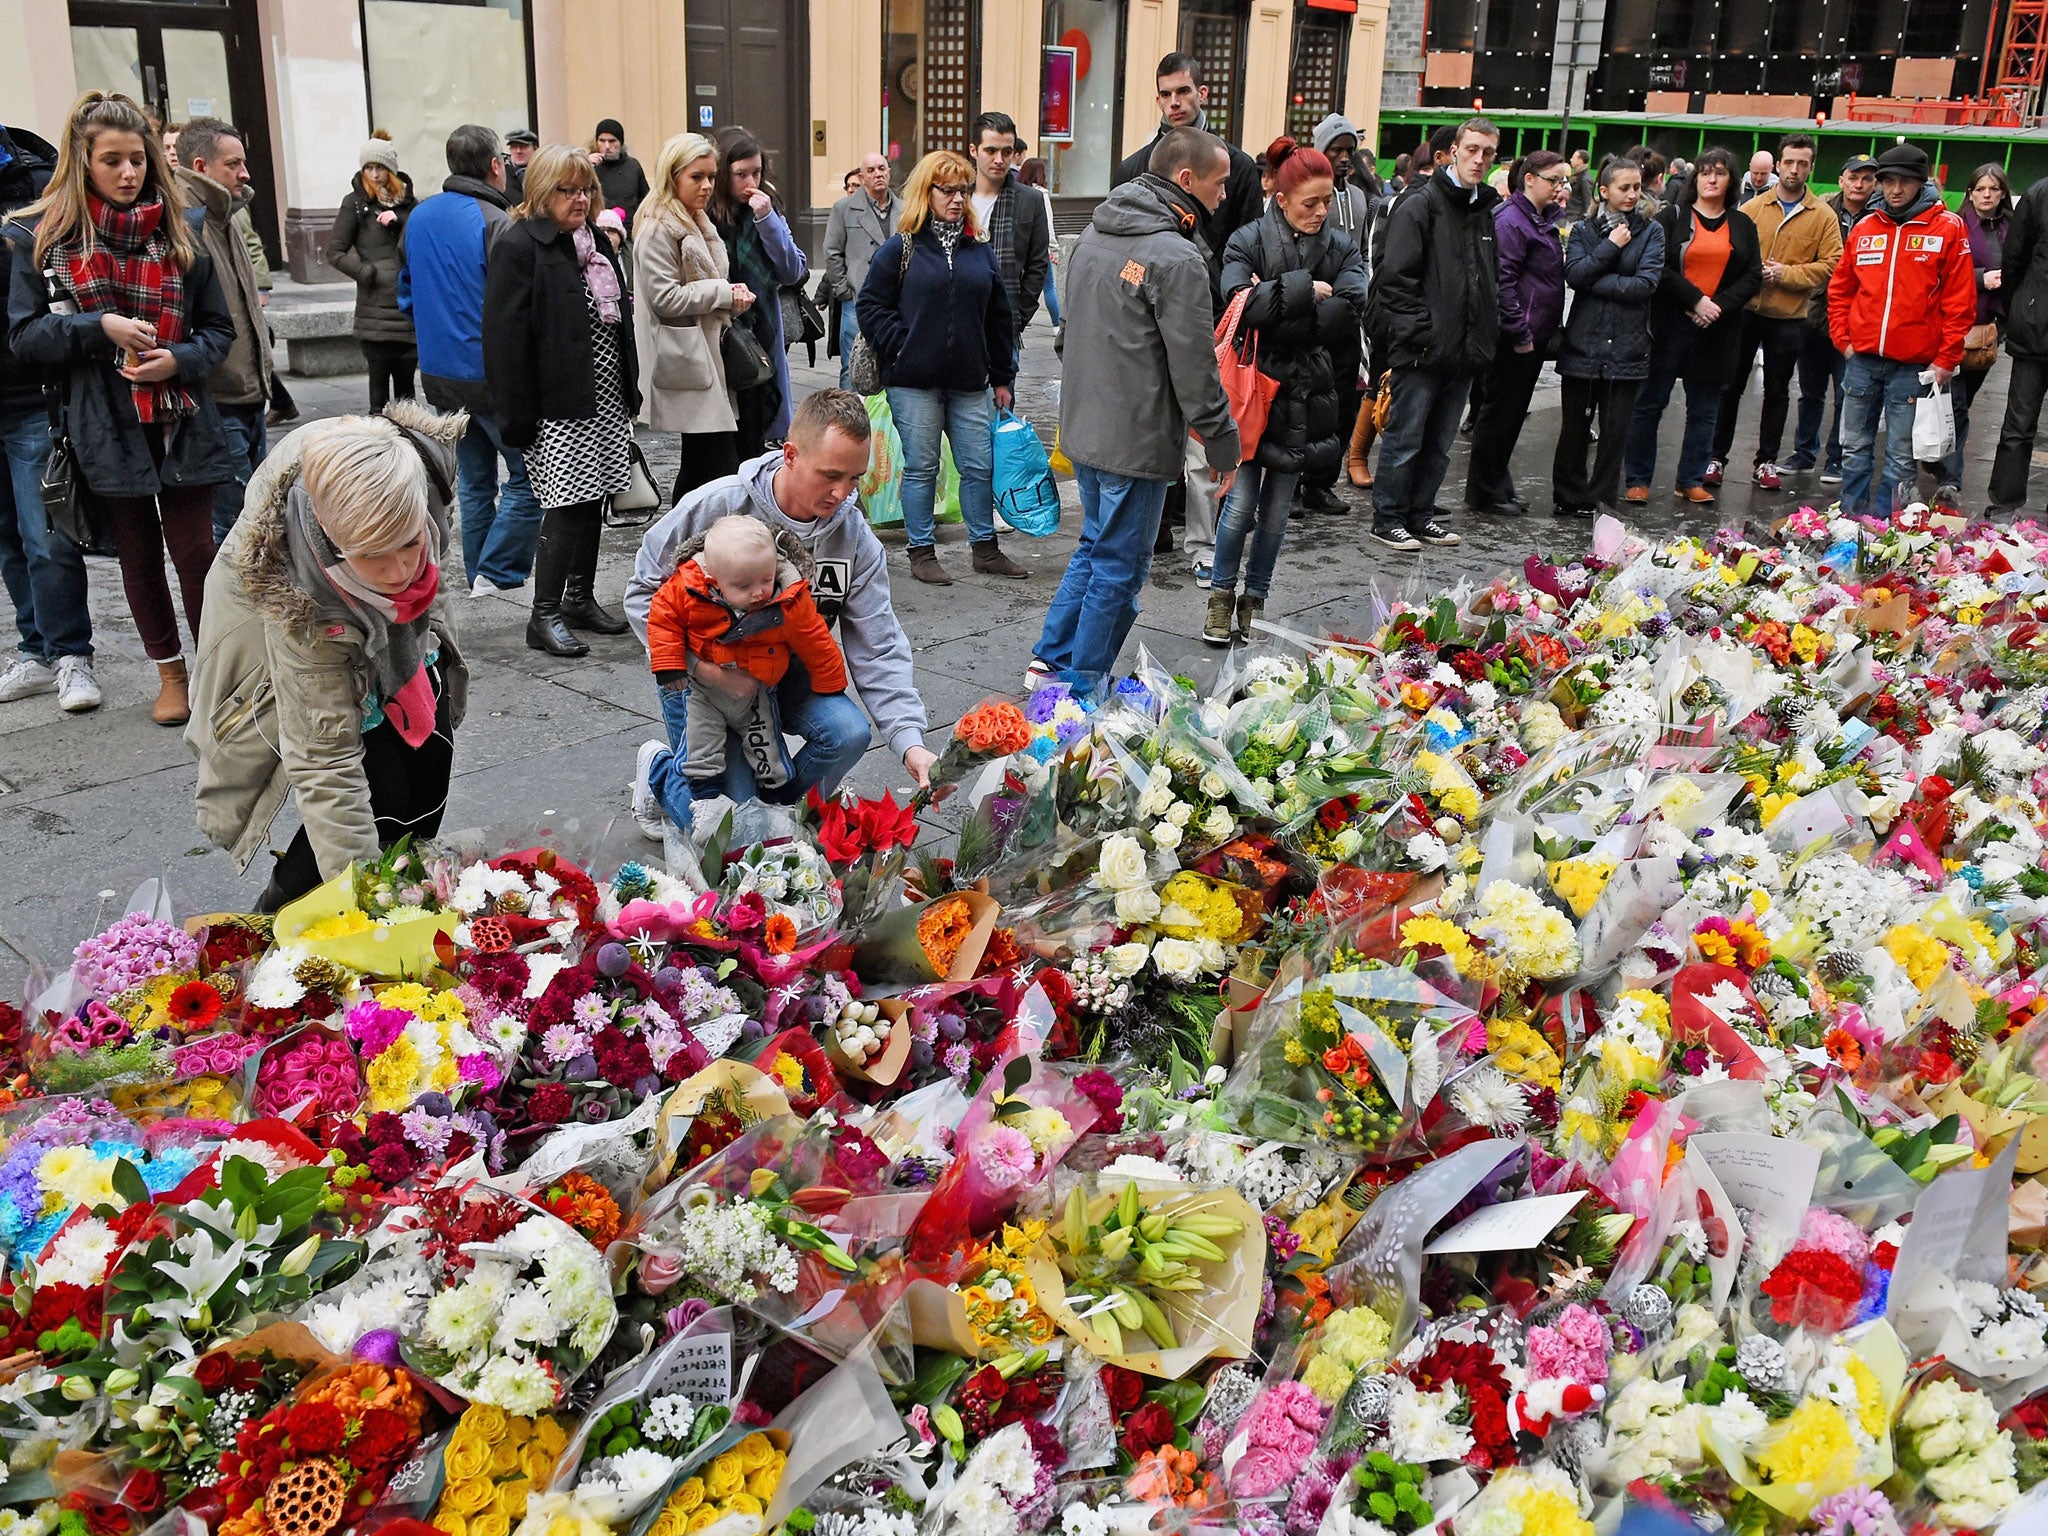 People lay floral tributes near to the scene of the bin lorry crash, a day after the tragedy on 23 December, 2014 in Glasgow